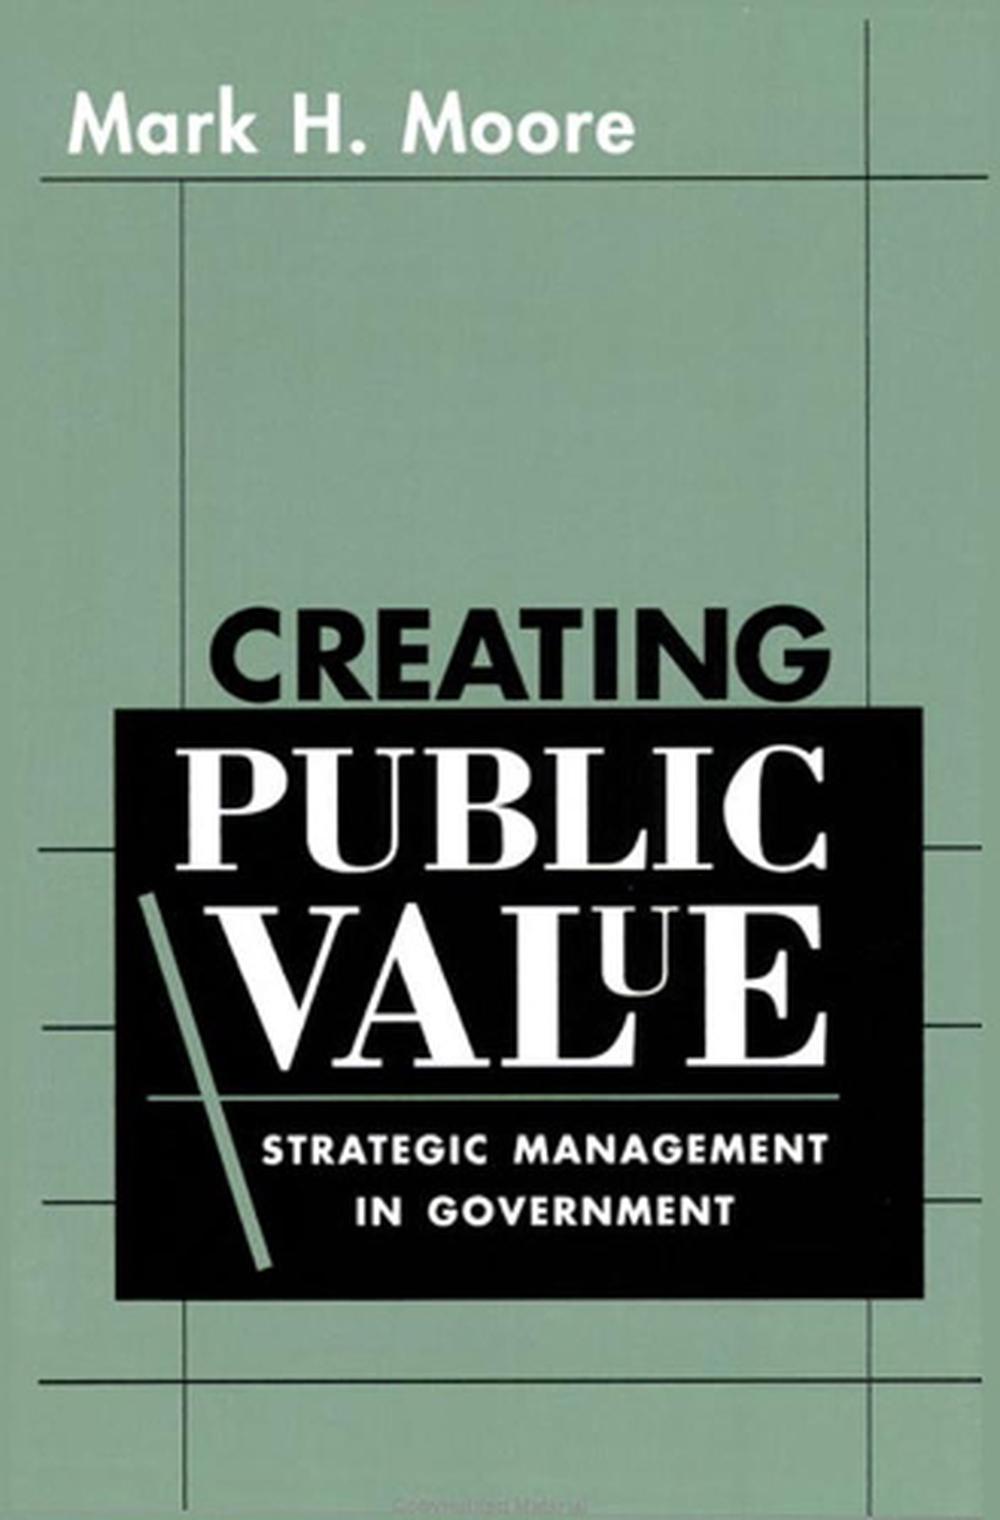 Creating Public Value Strategic Management in Government by Mark H